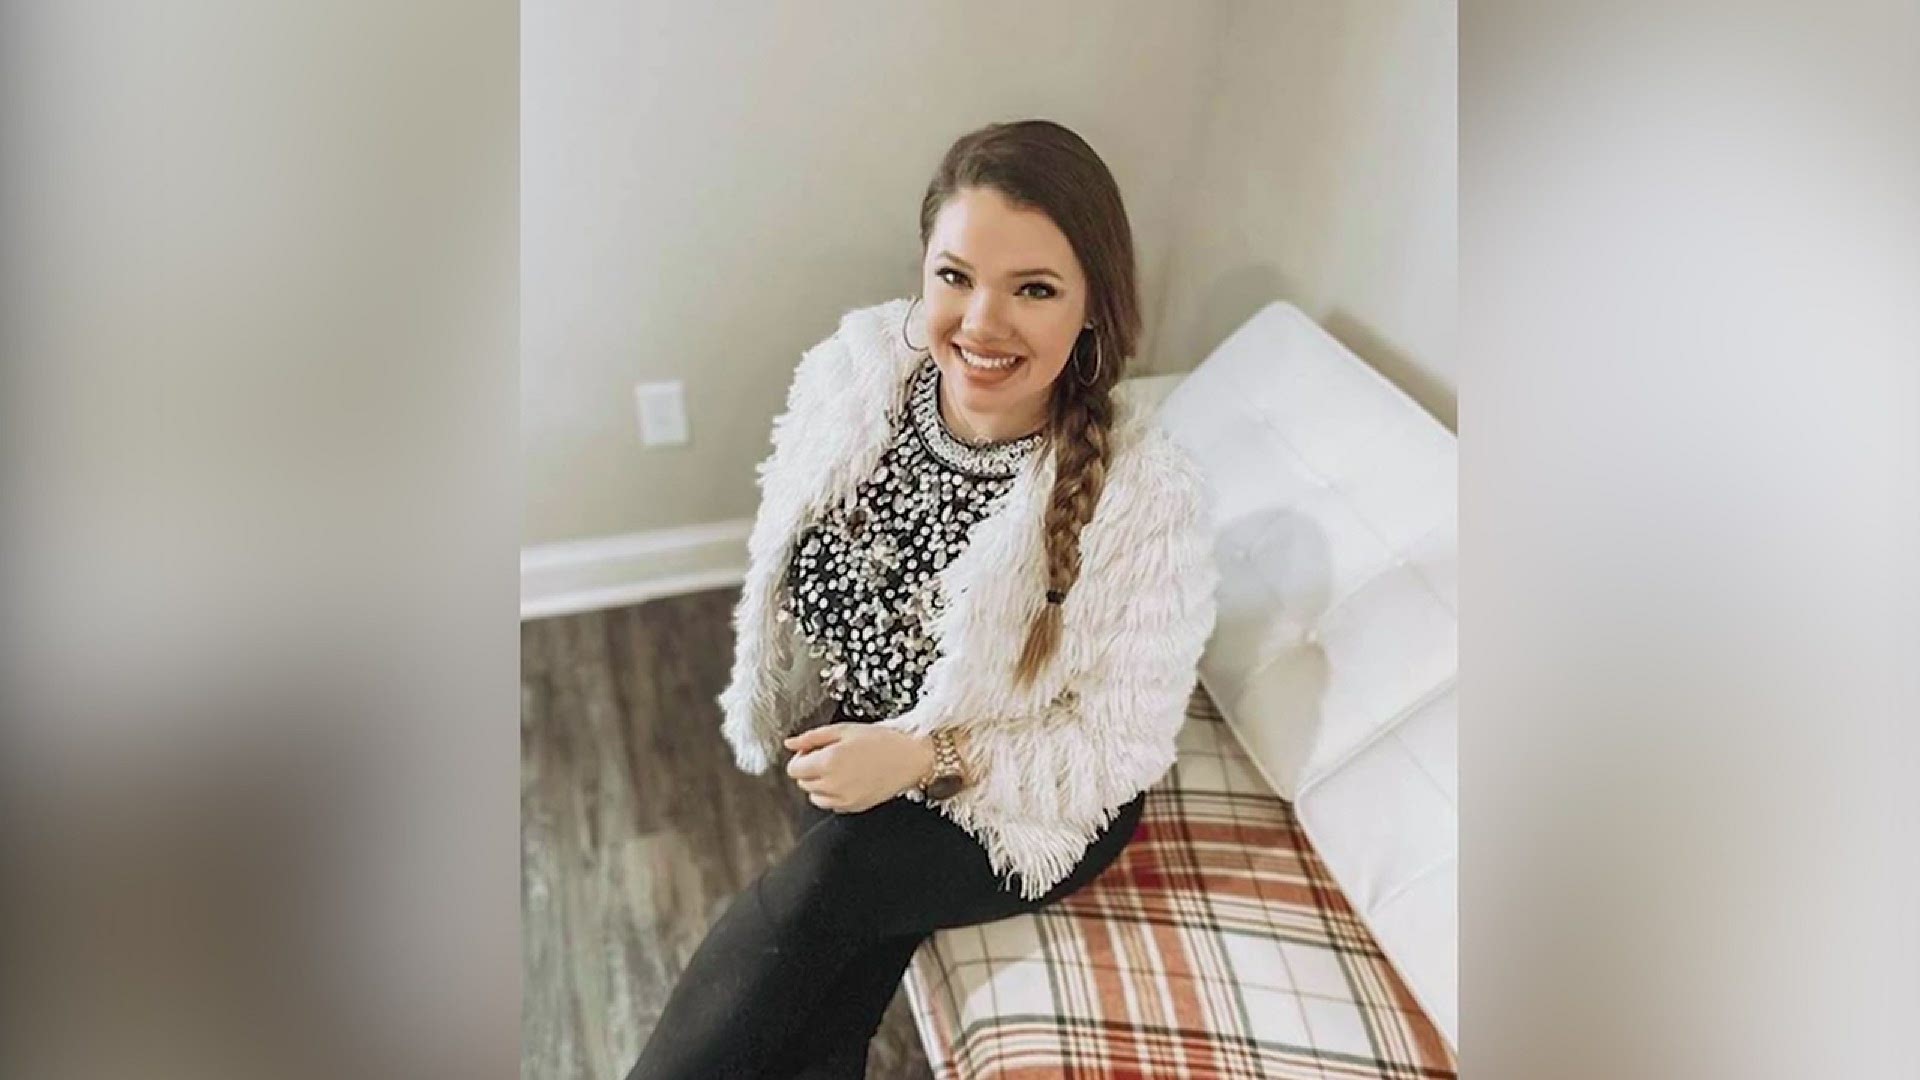 Madeline Taylor was a healthy, happy 21-year-old mother. After beating COVID-19, she fully recovered. Only to die months later of a stroke, believed caused by COVID